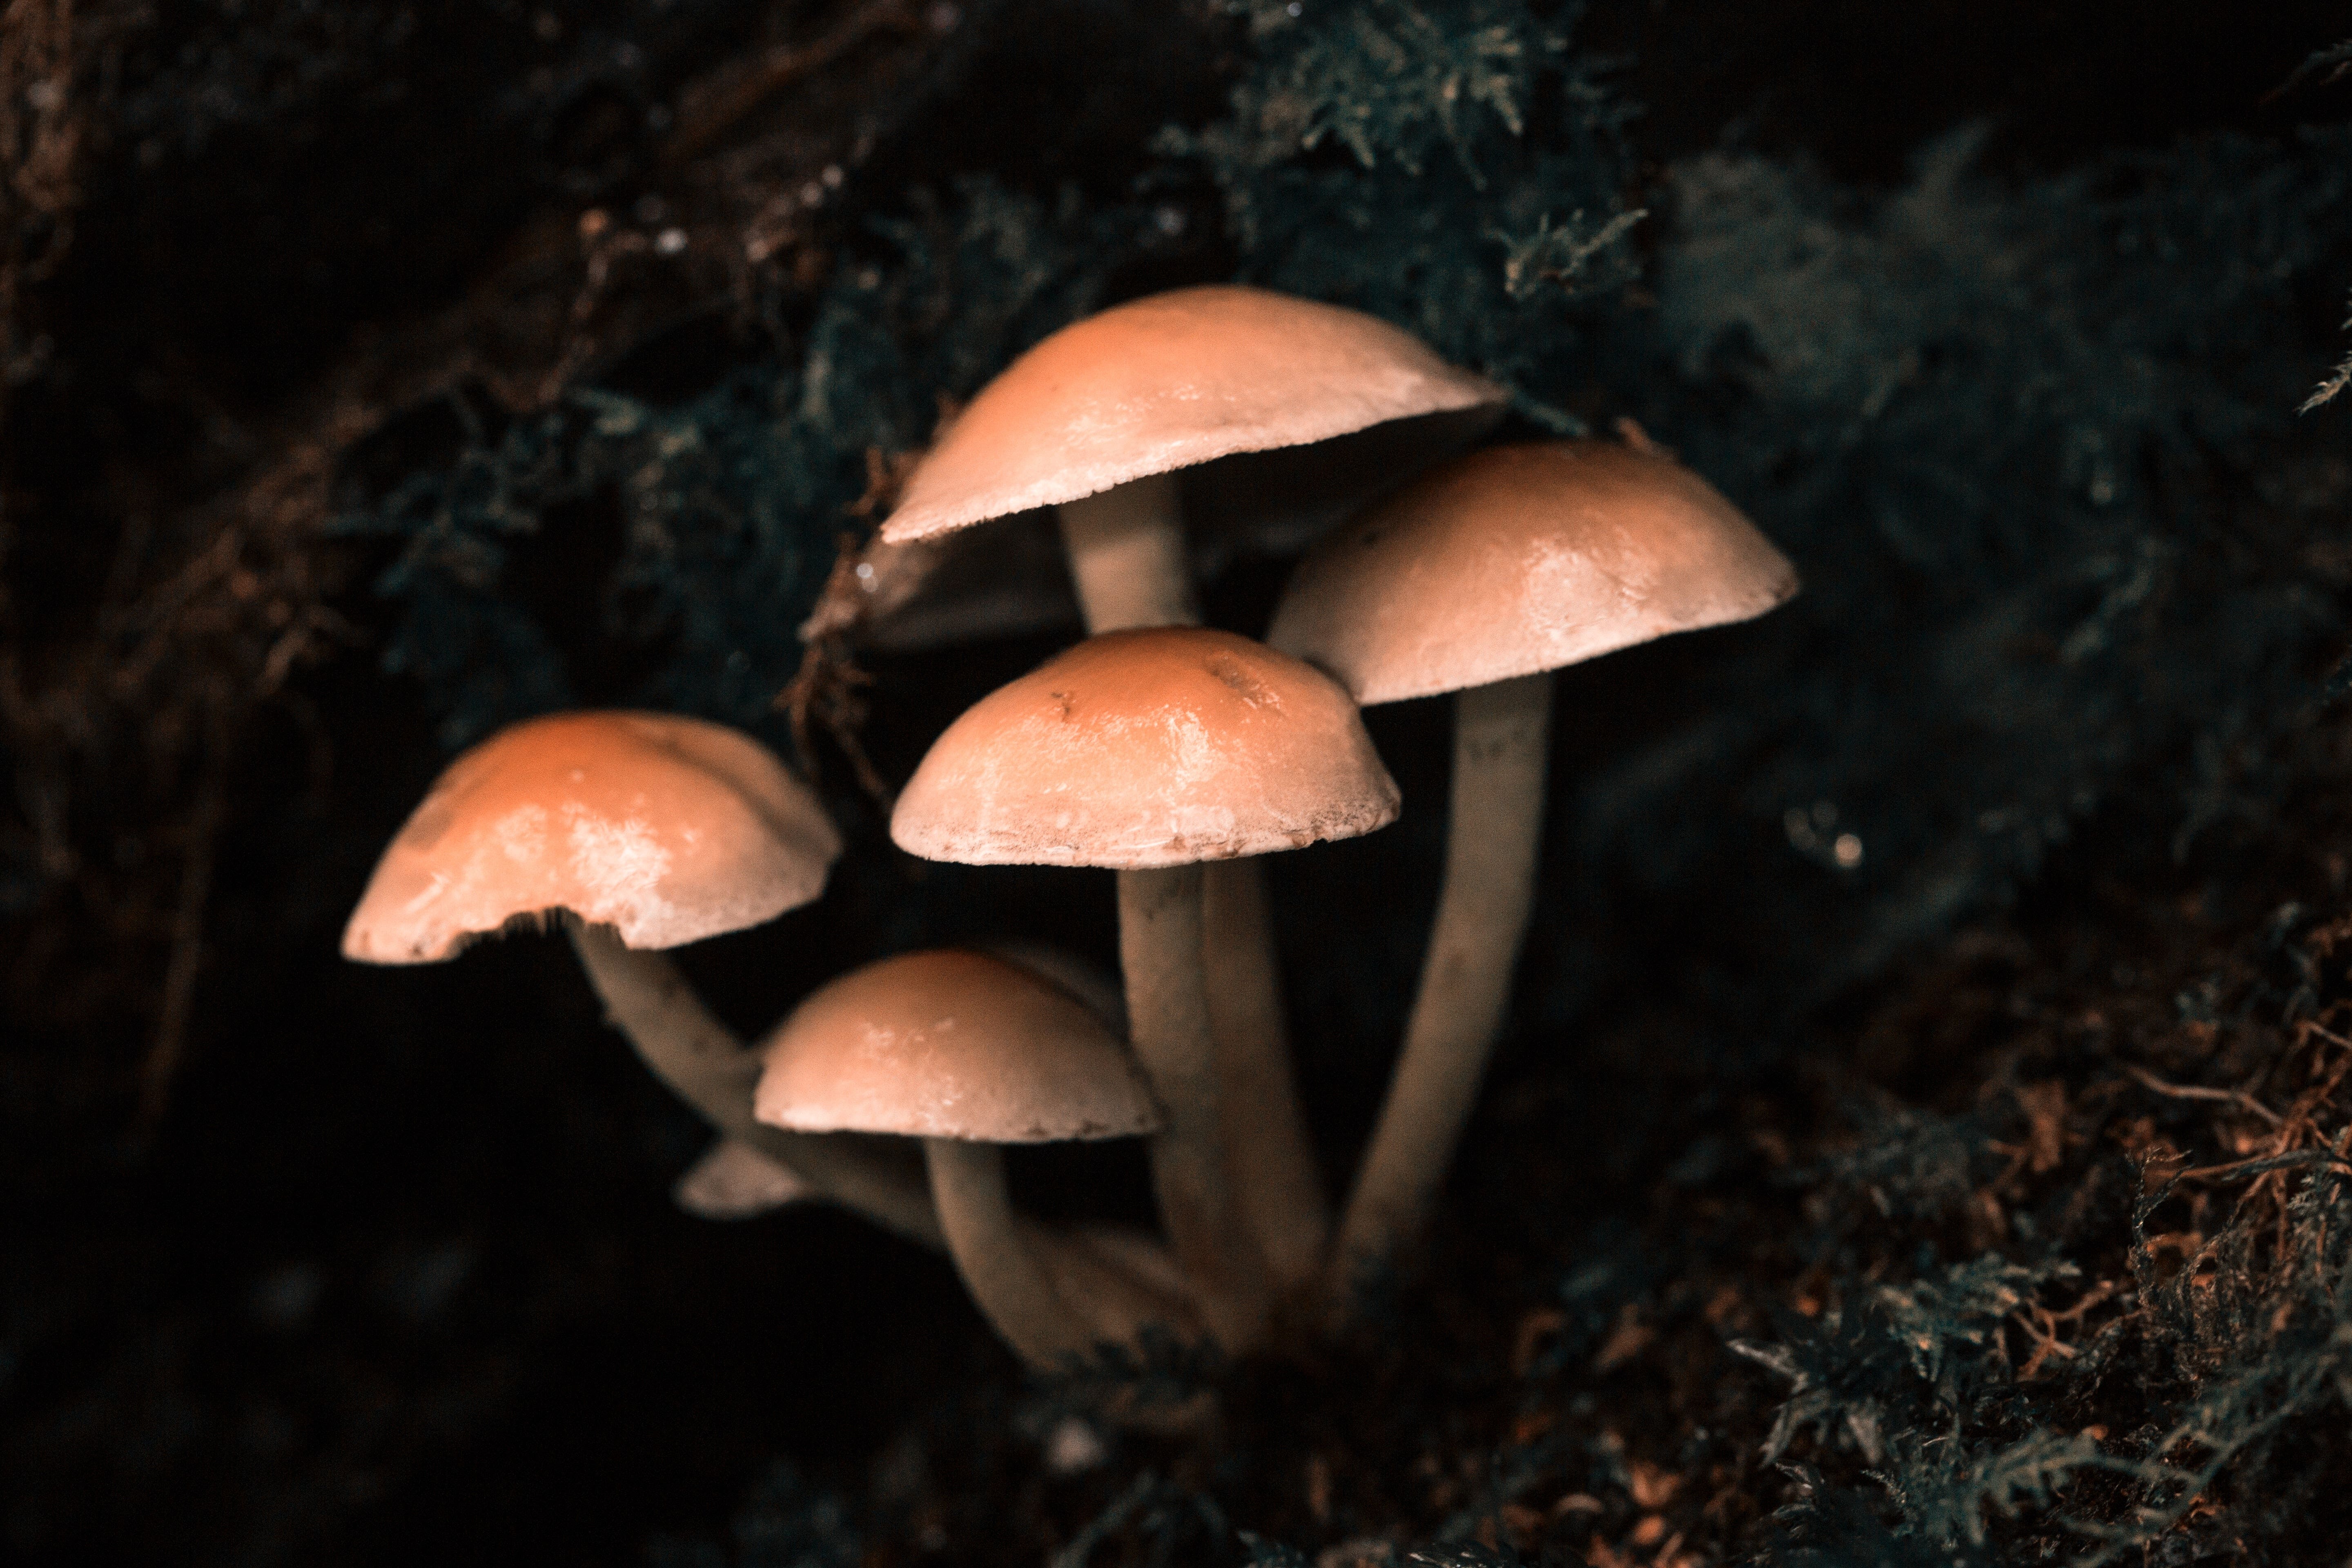 NeonMind Goes Public, Plans To Study Functional Mushrooms And Psilocybin As Treatments